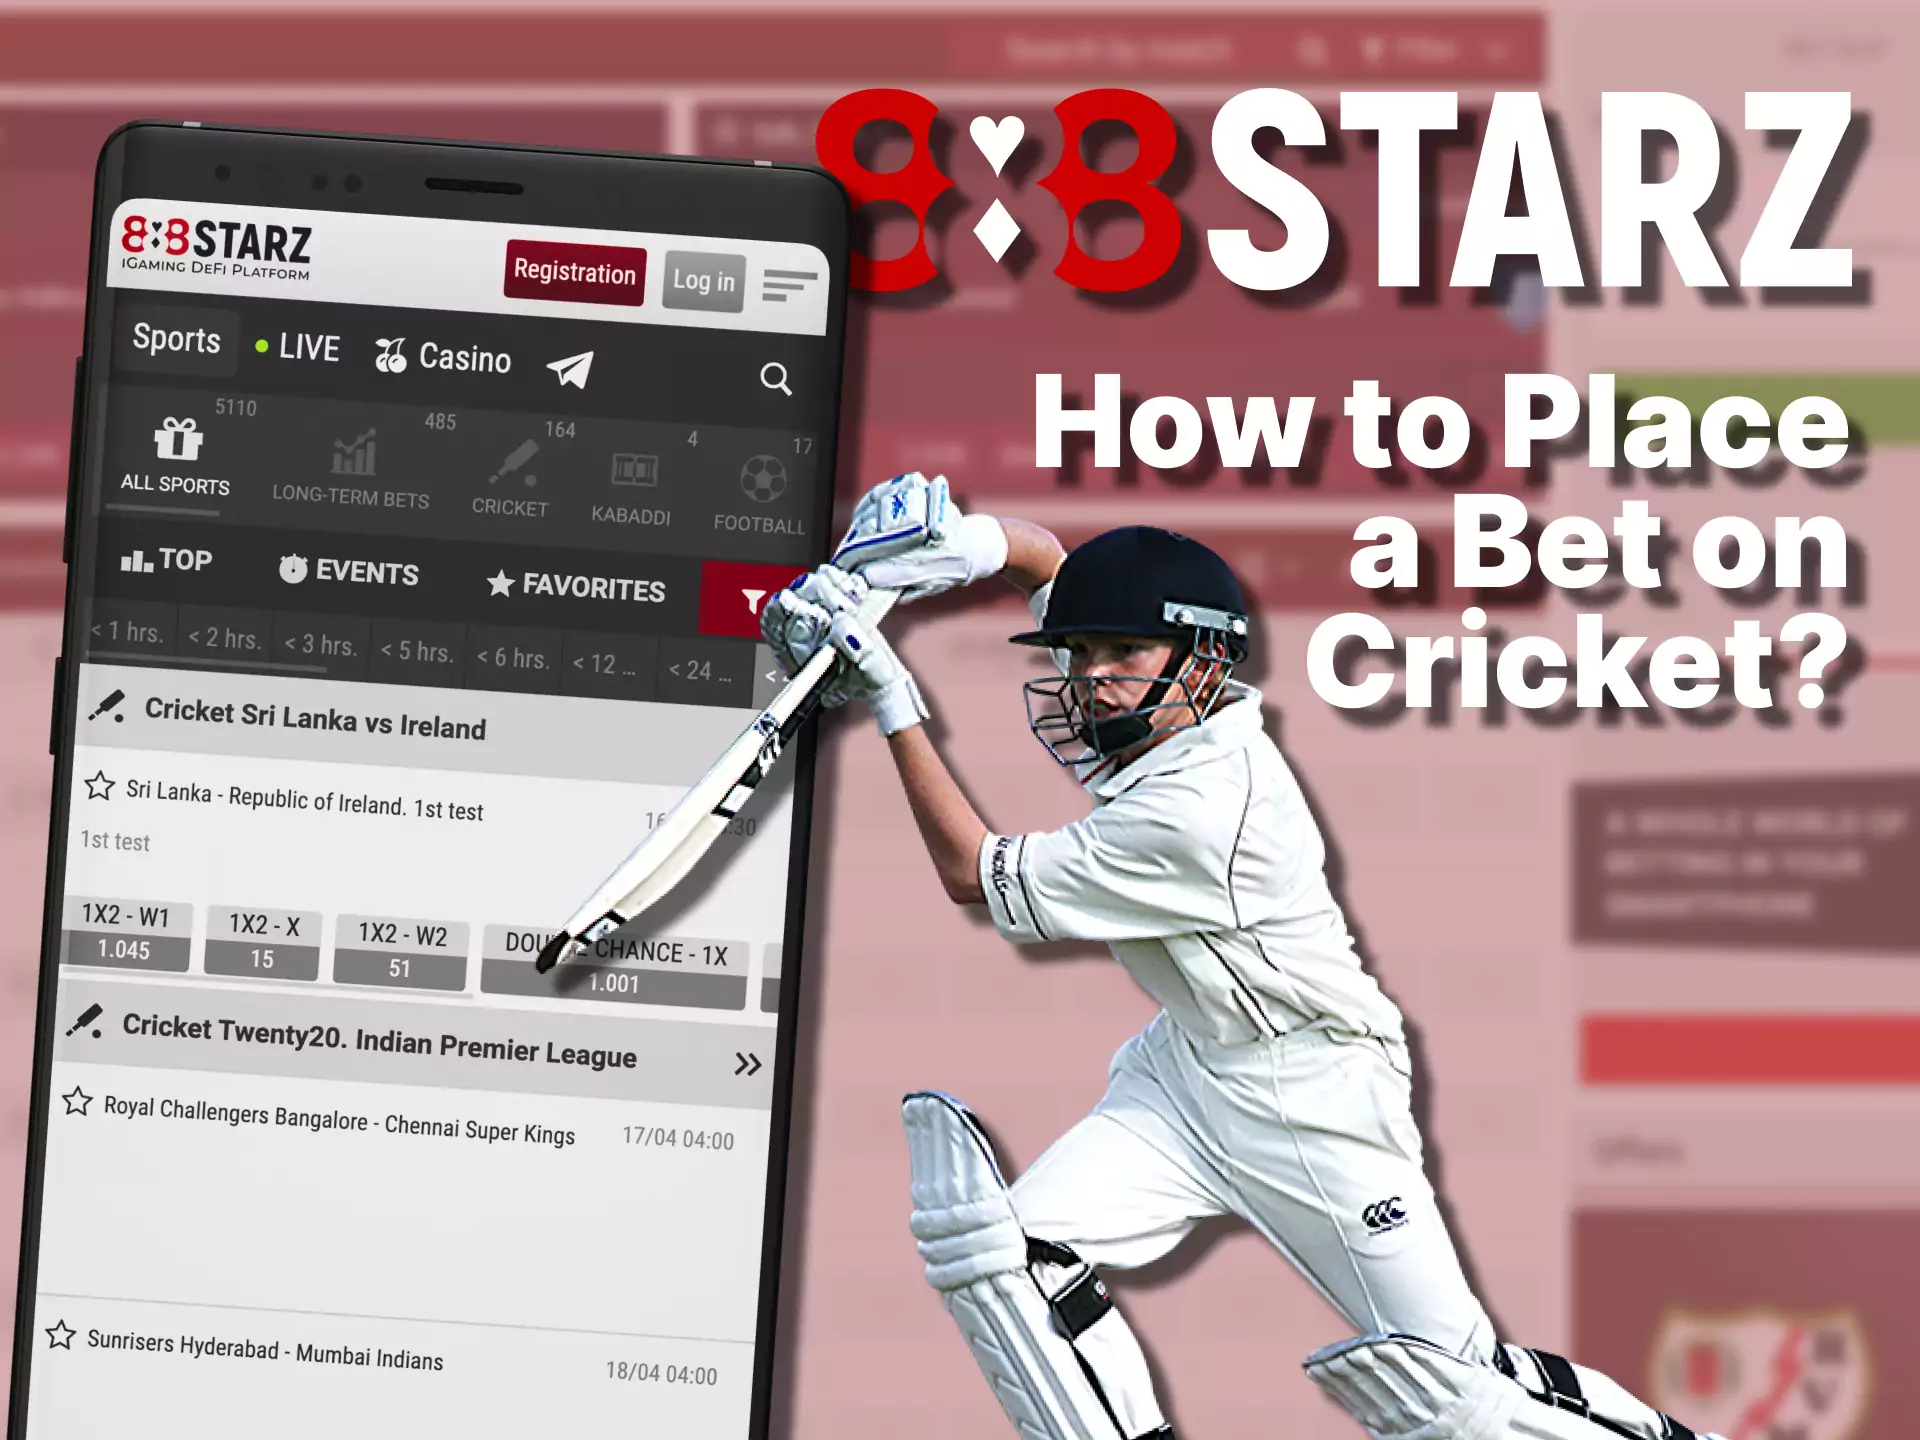 Find out how quickly and easily you can start betting on cricket in the 888starz app.